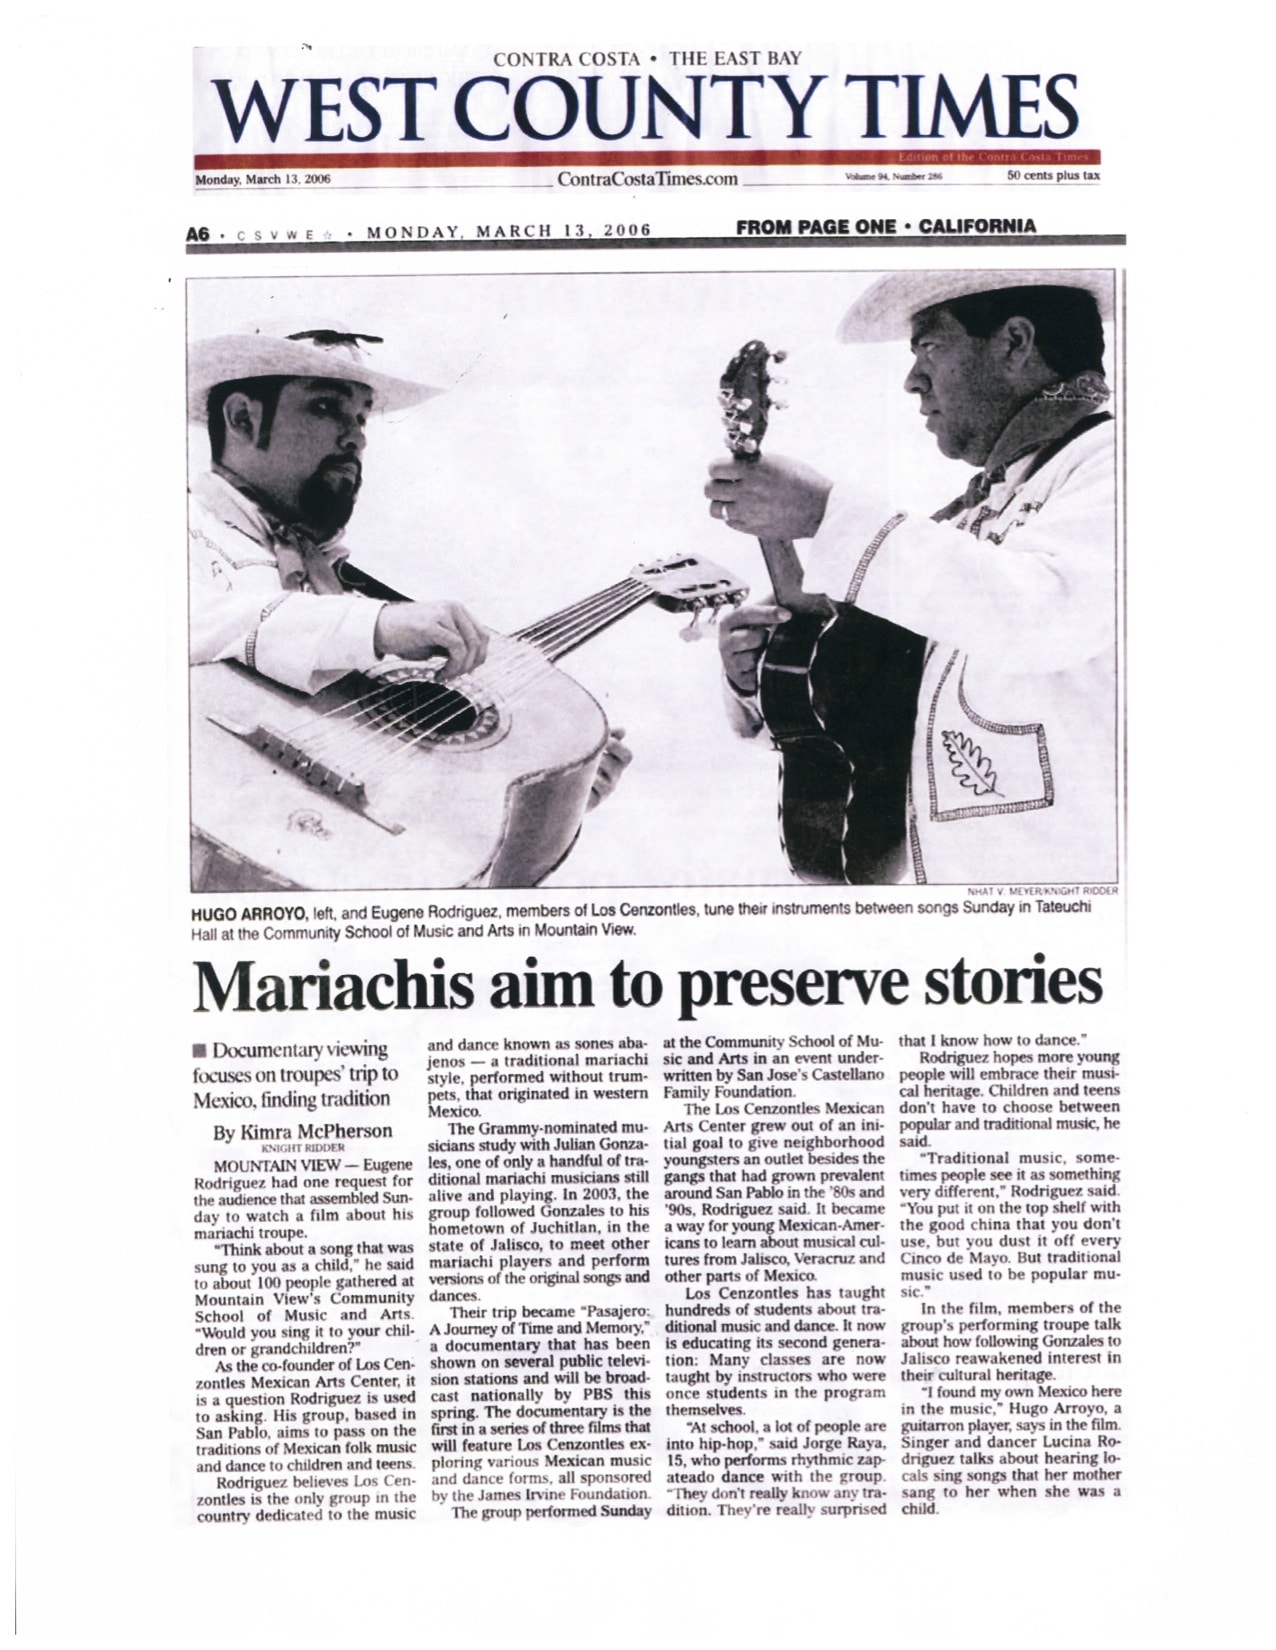 Mariachis aim to preserve stories